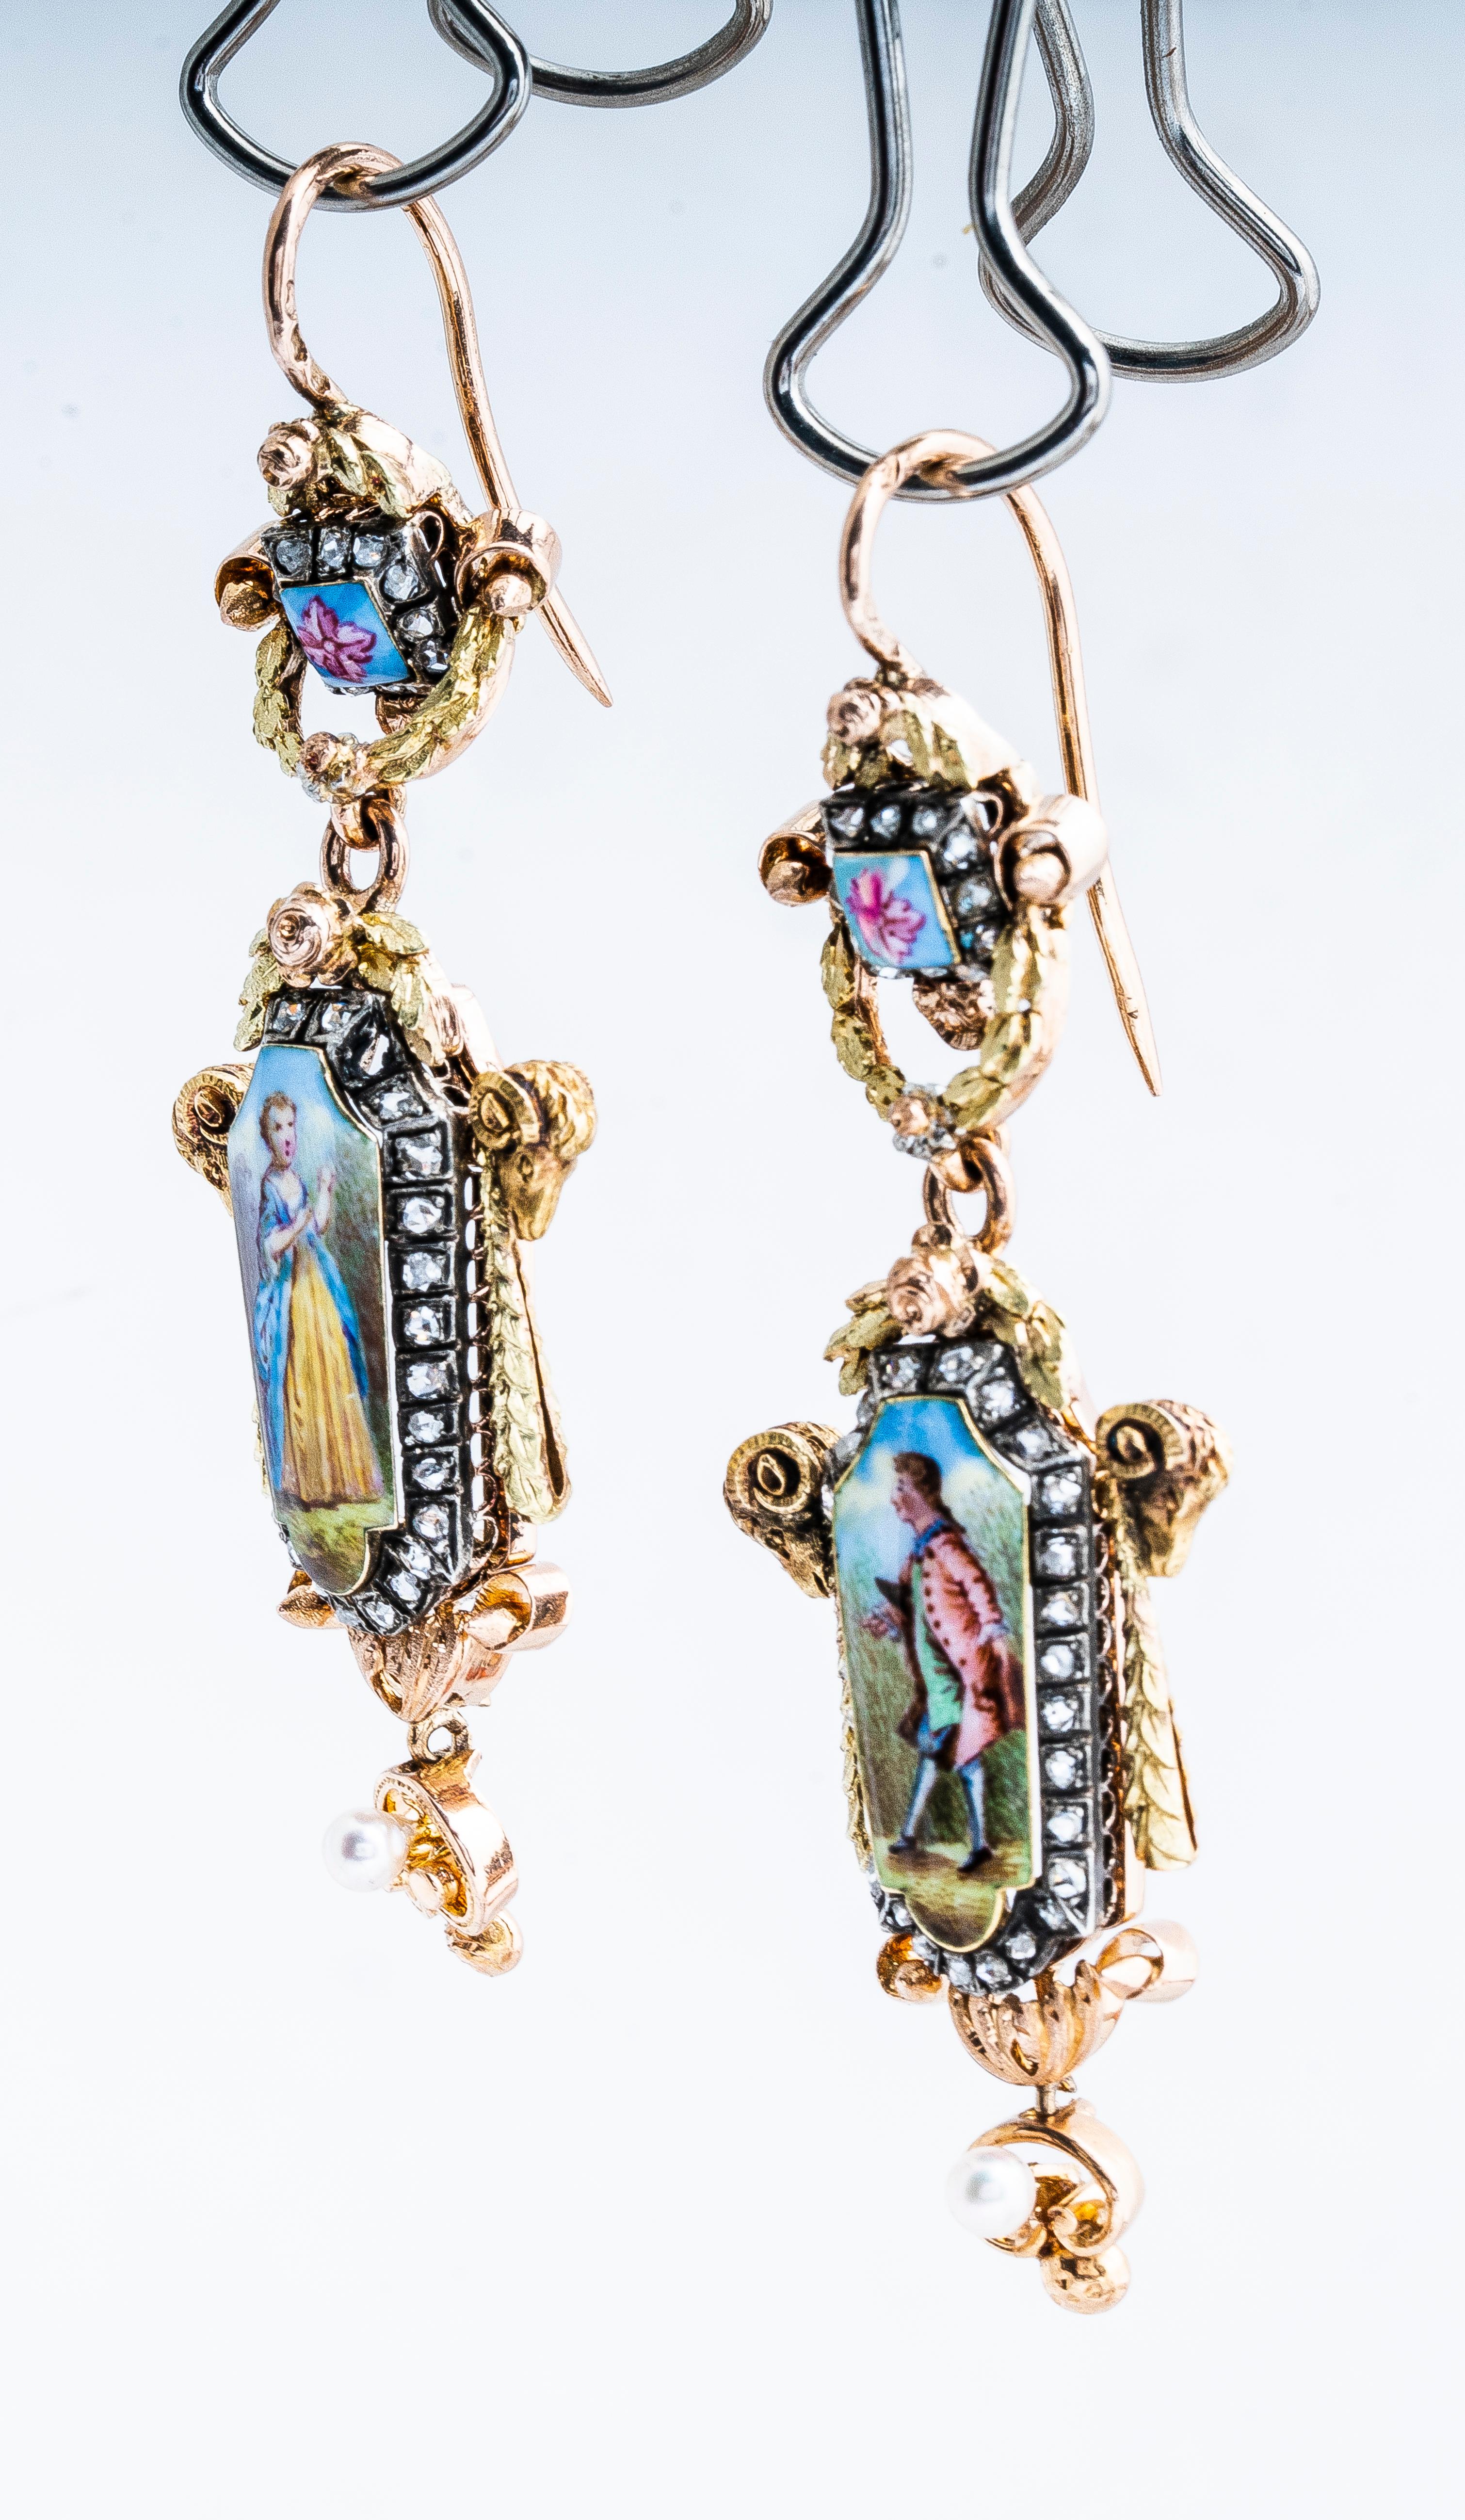 Antique Georgian 18k yellow and rose gold with silver top painted mini portrait man/woman portrait French dangle earrings with shepherd hooks.  Earrings have a man on one earrings and a woman on the other.  Rose cut diamonds encircle the portraits